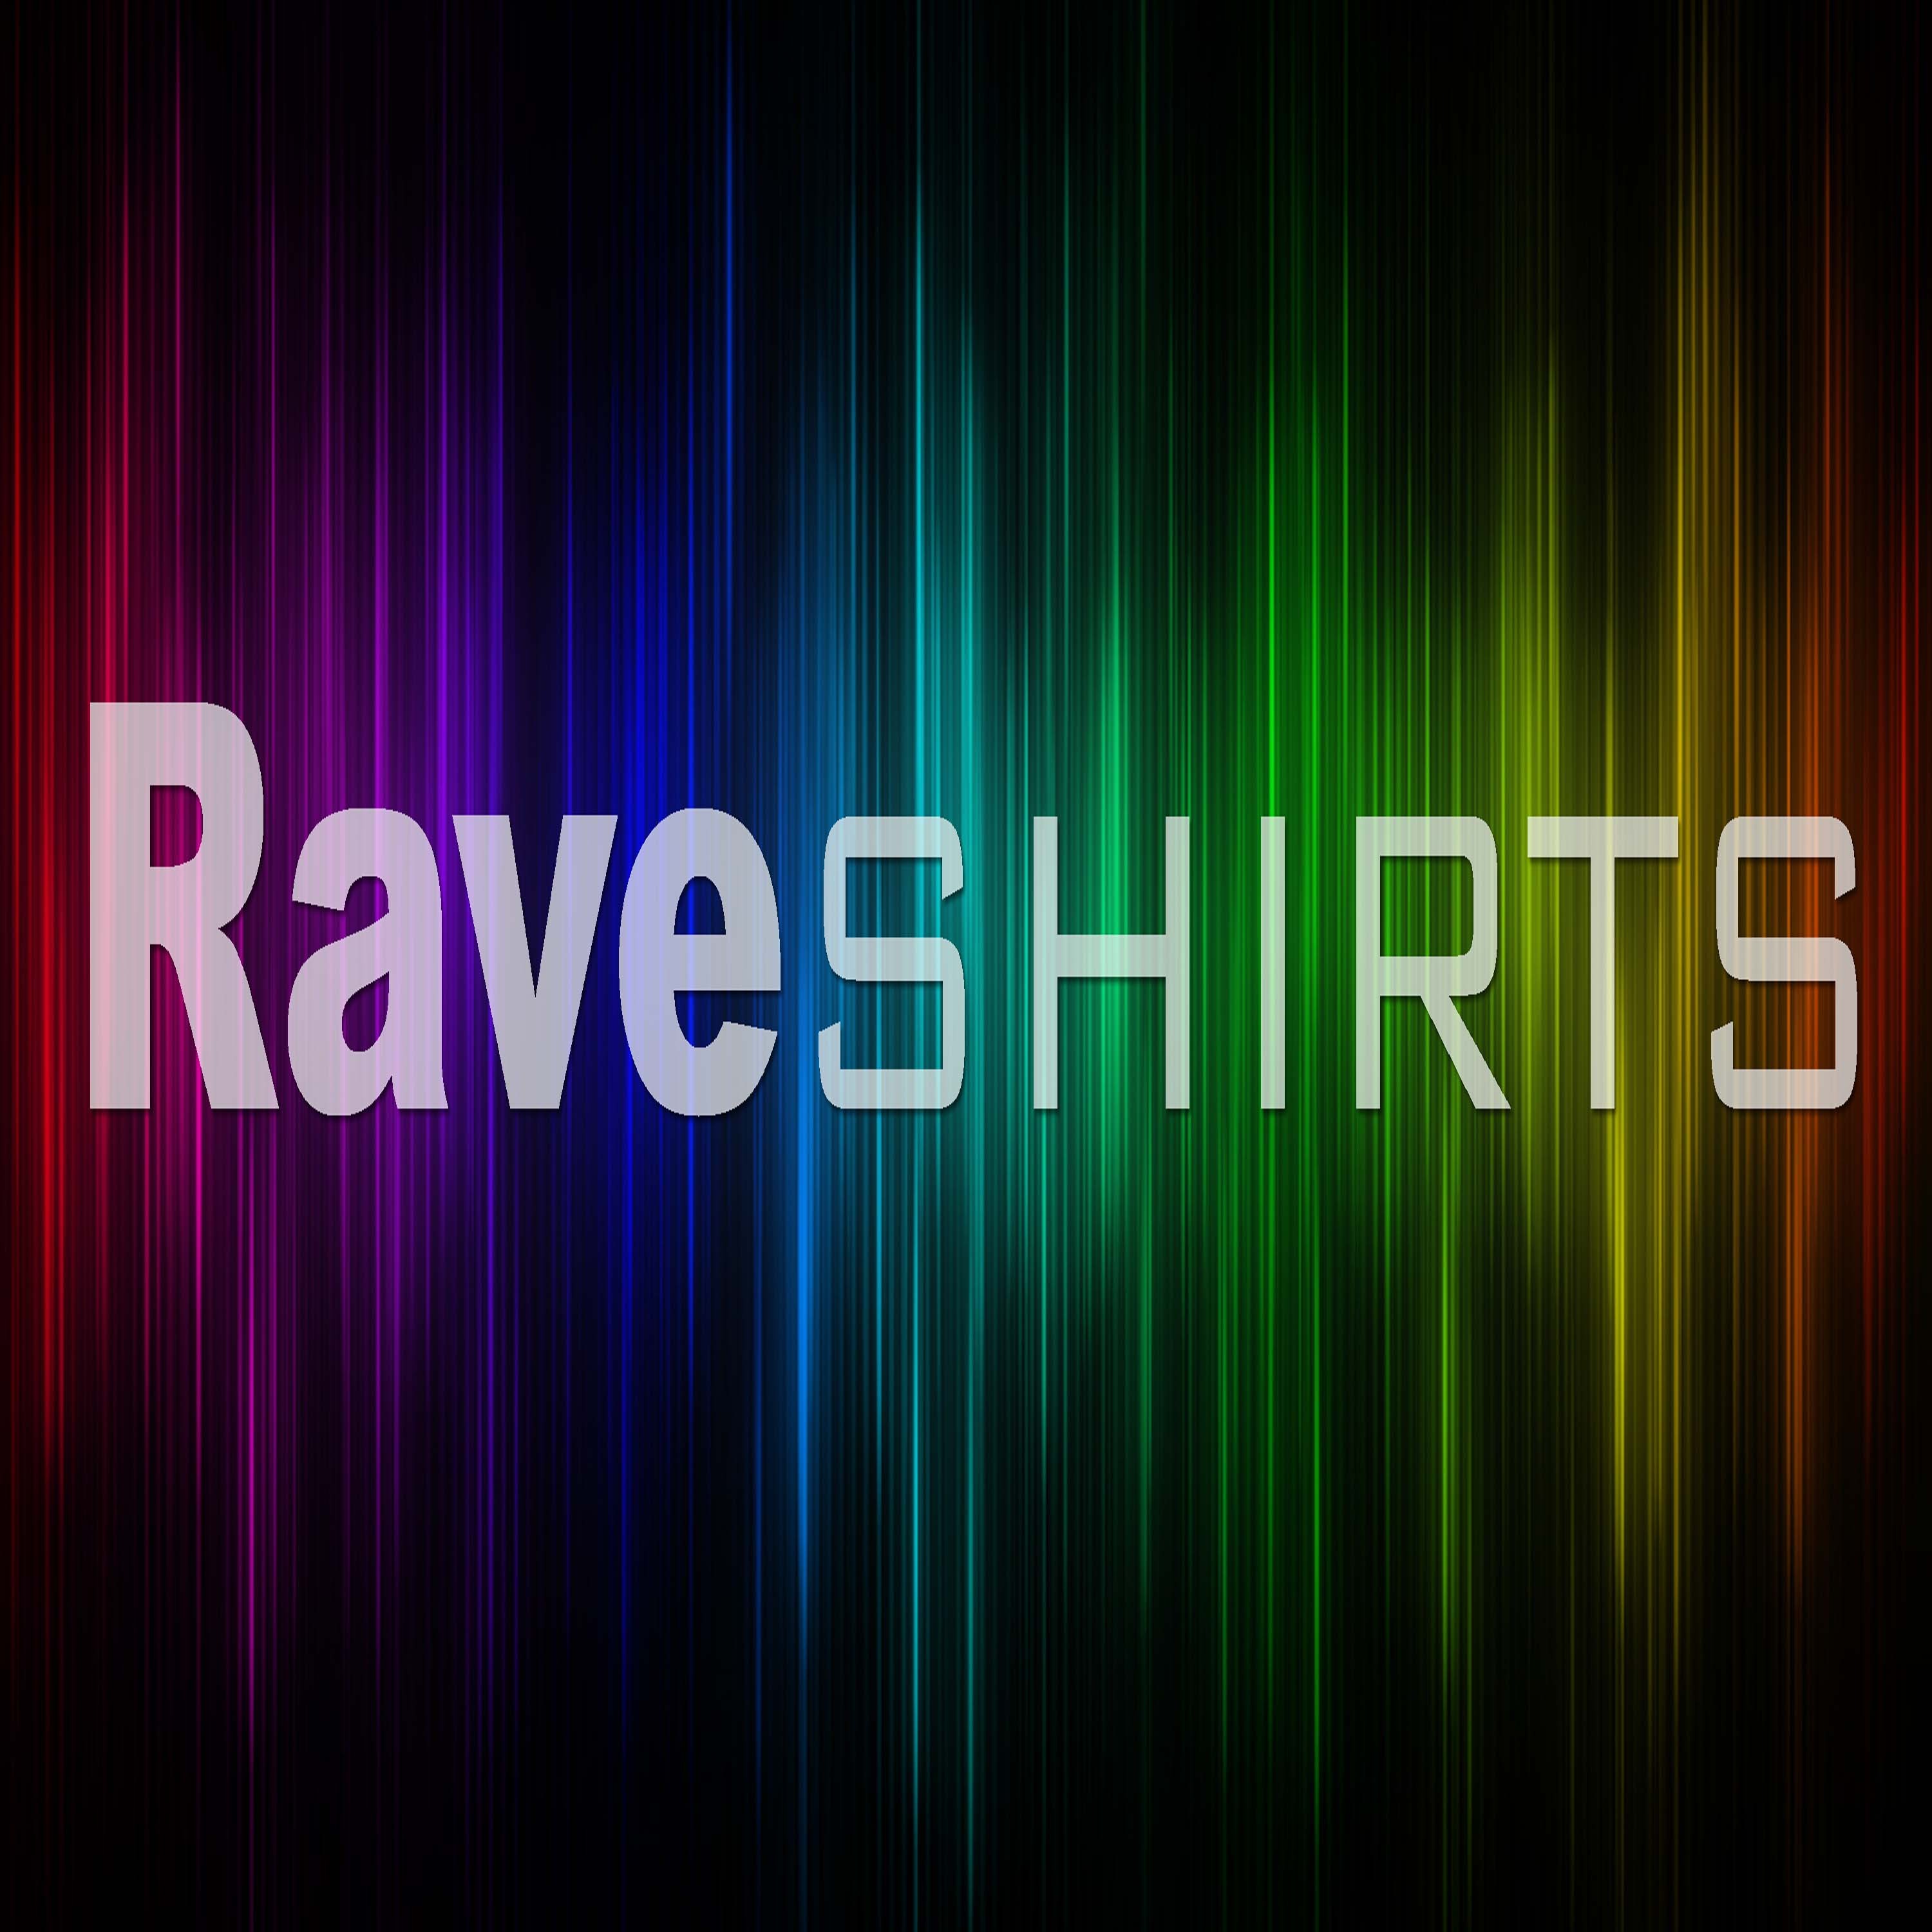 Shirts for raves, clubbing, or just going out. Email if you have a custom design you would like made! Raveshirts@gmail.com